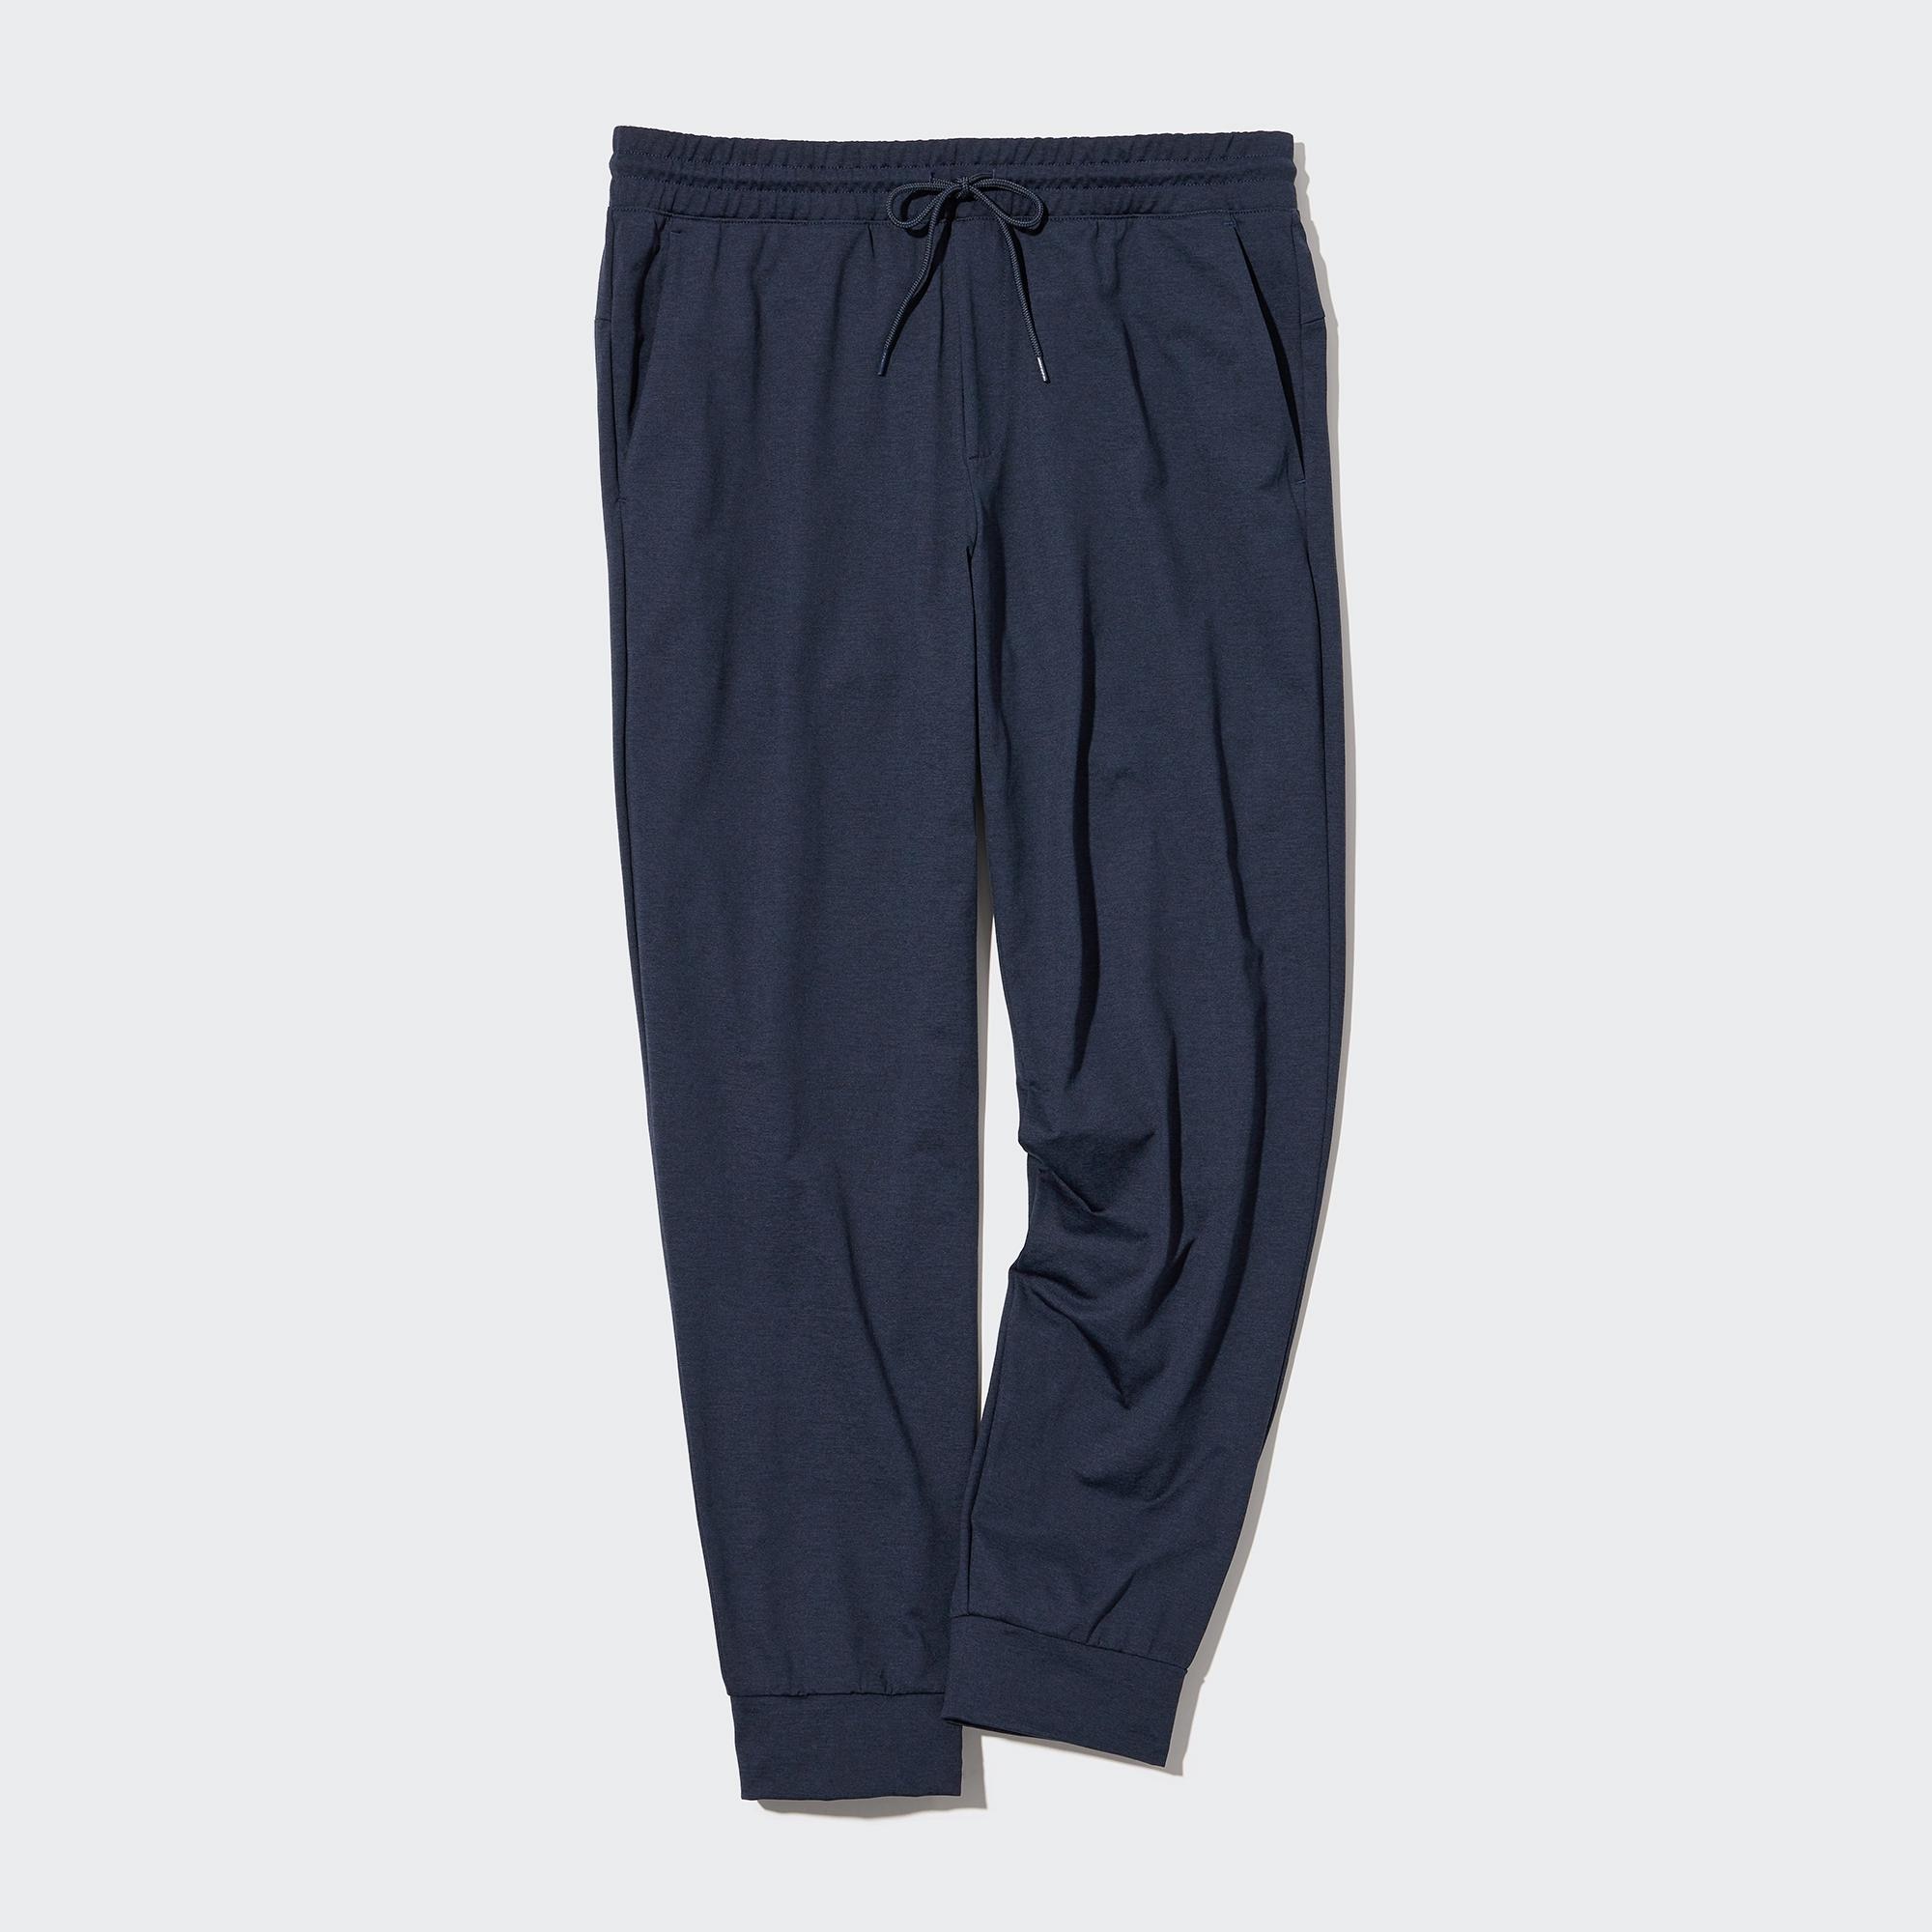 How To Style JOGGERS  Uniqlo Joggers Review 